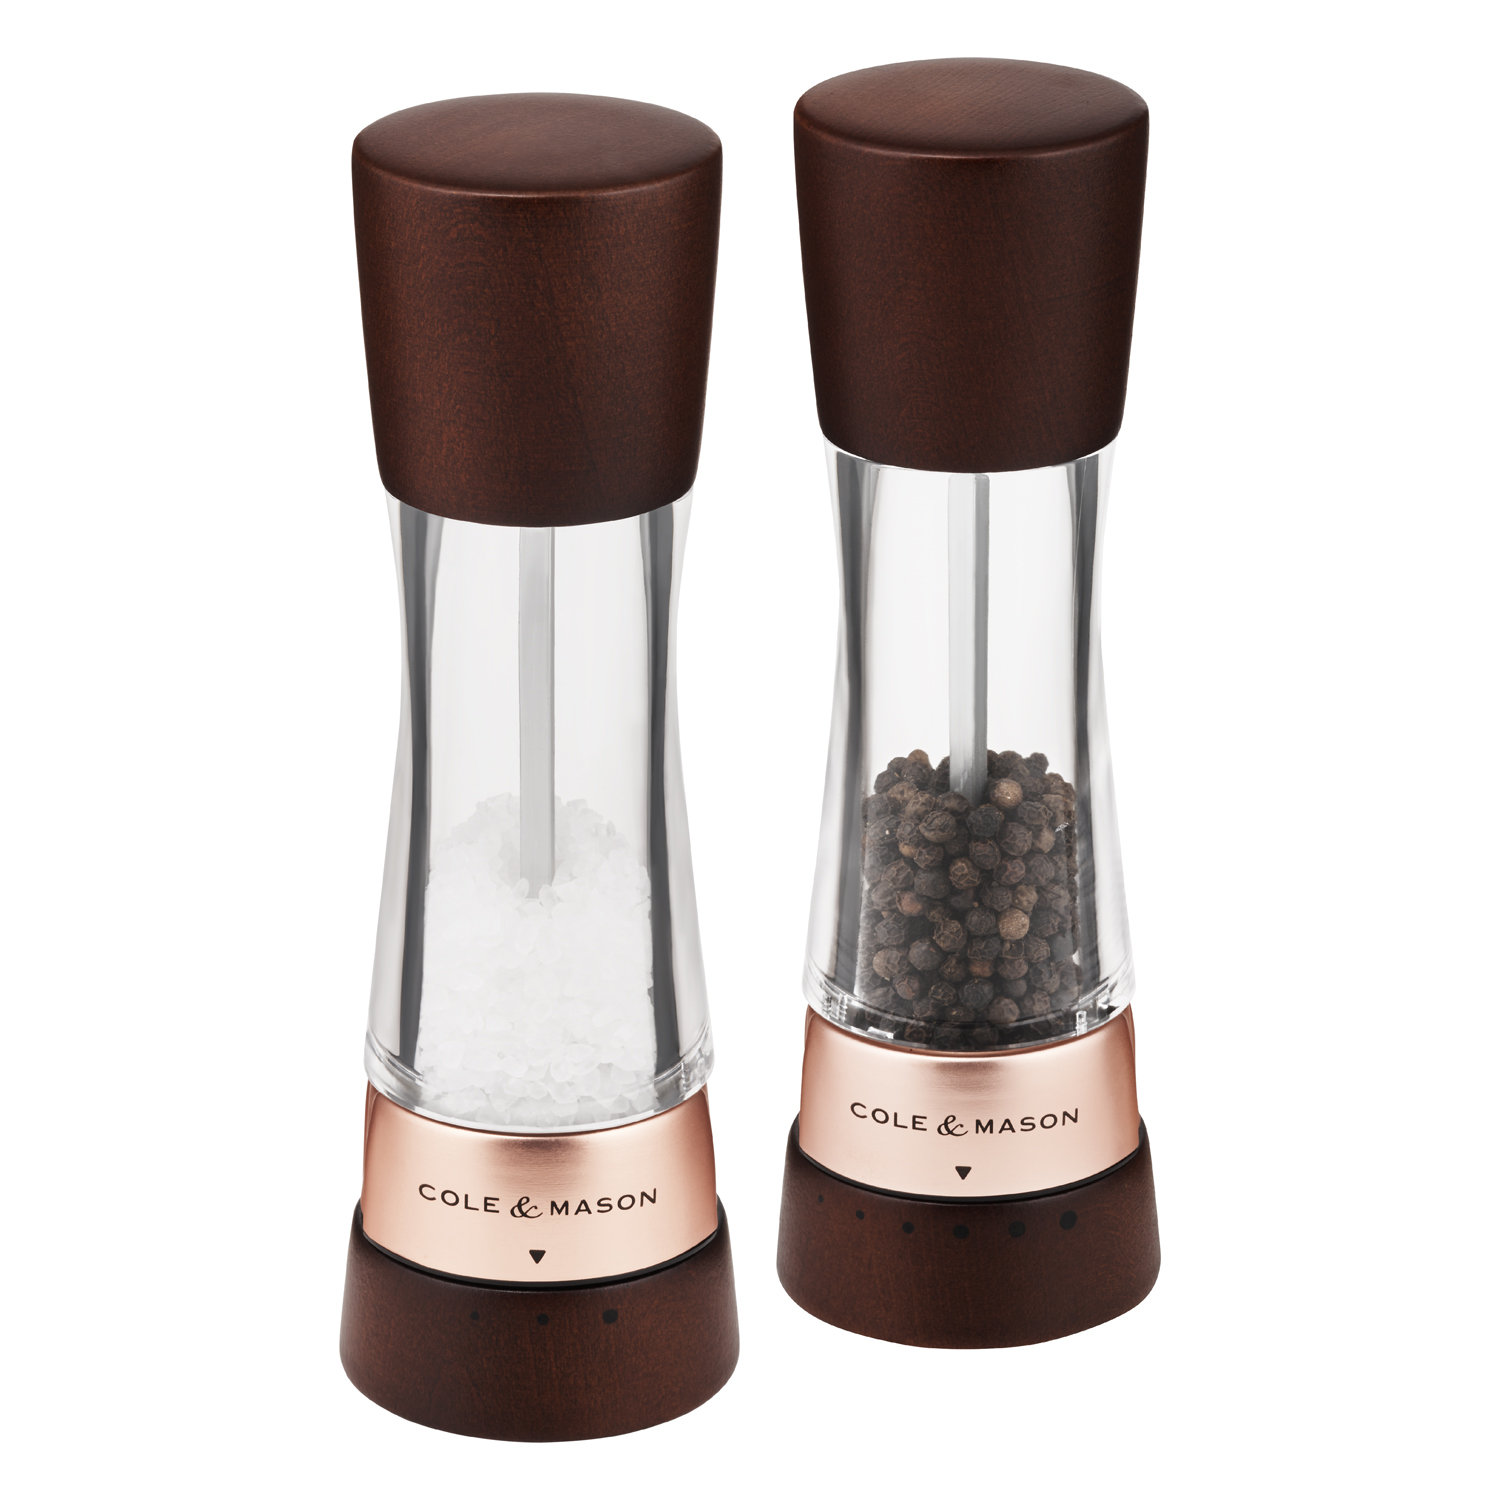 Lenox LX Collective Pepper Mill